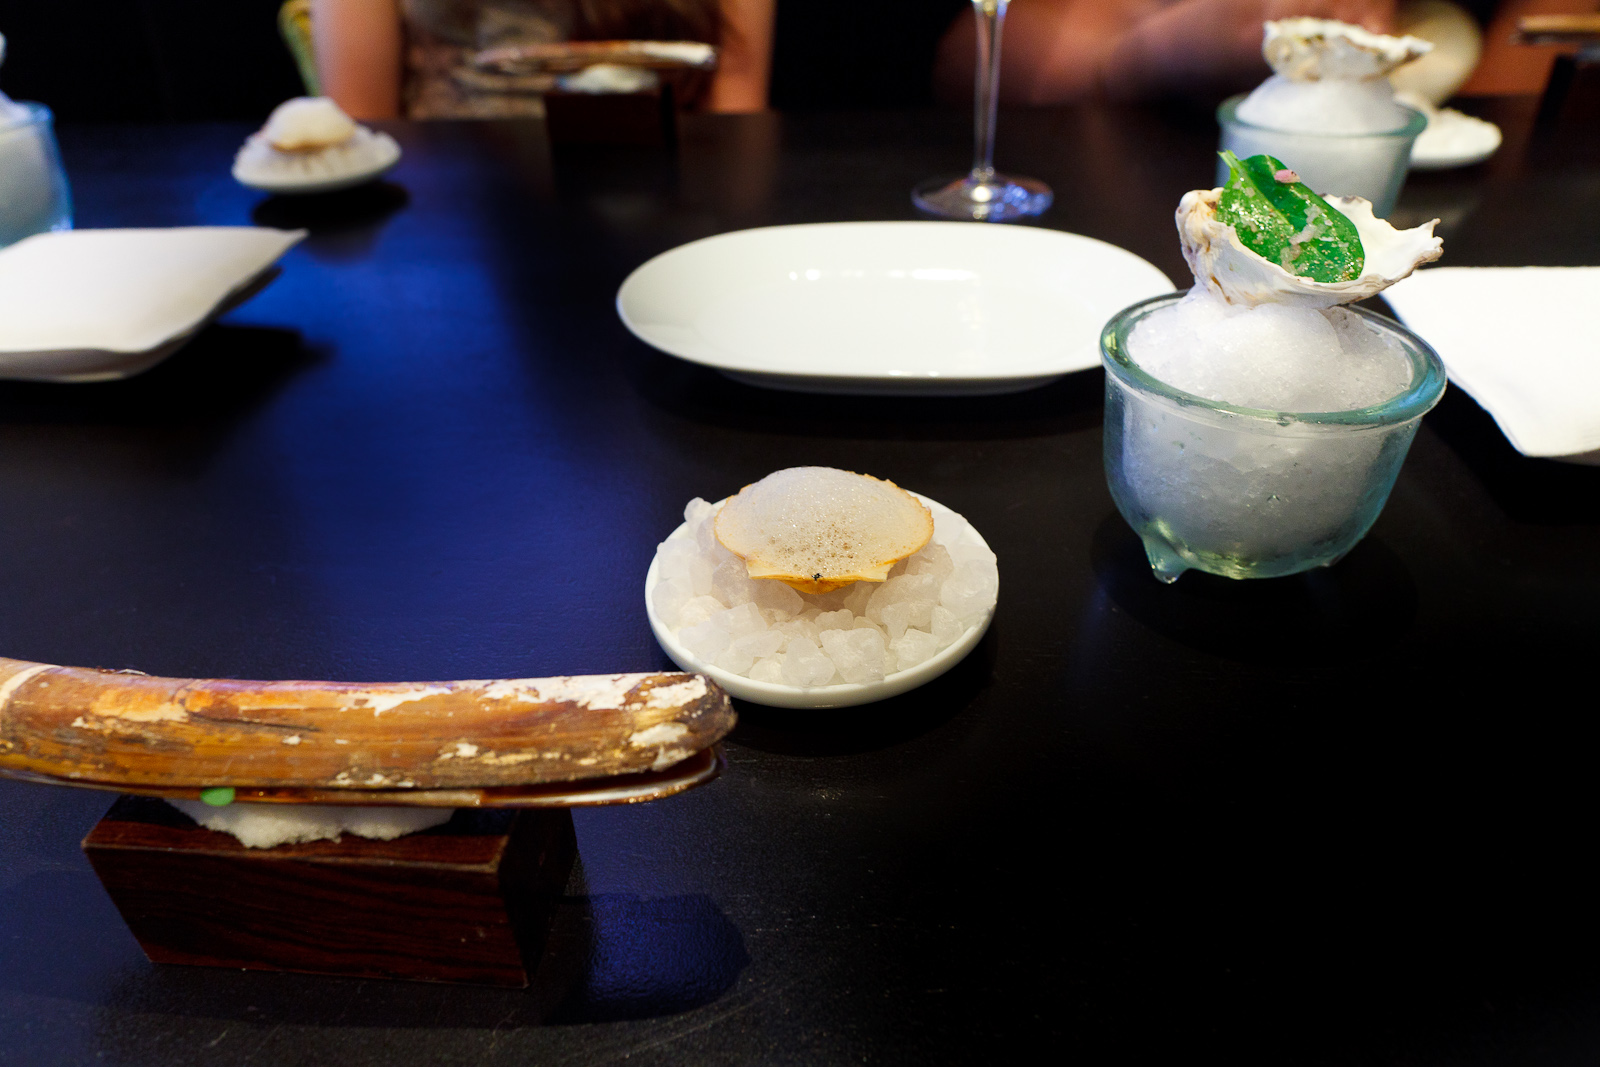 3rd/4th/5th Courses: Oyster leaf mignonette / scallop, hitachino, weizen, old bay / razor clam, carrot, soy, daikon